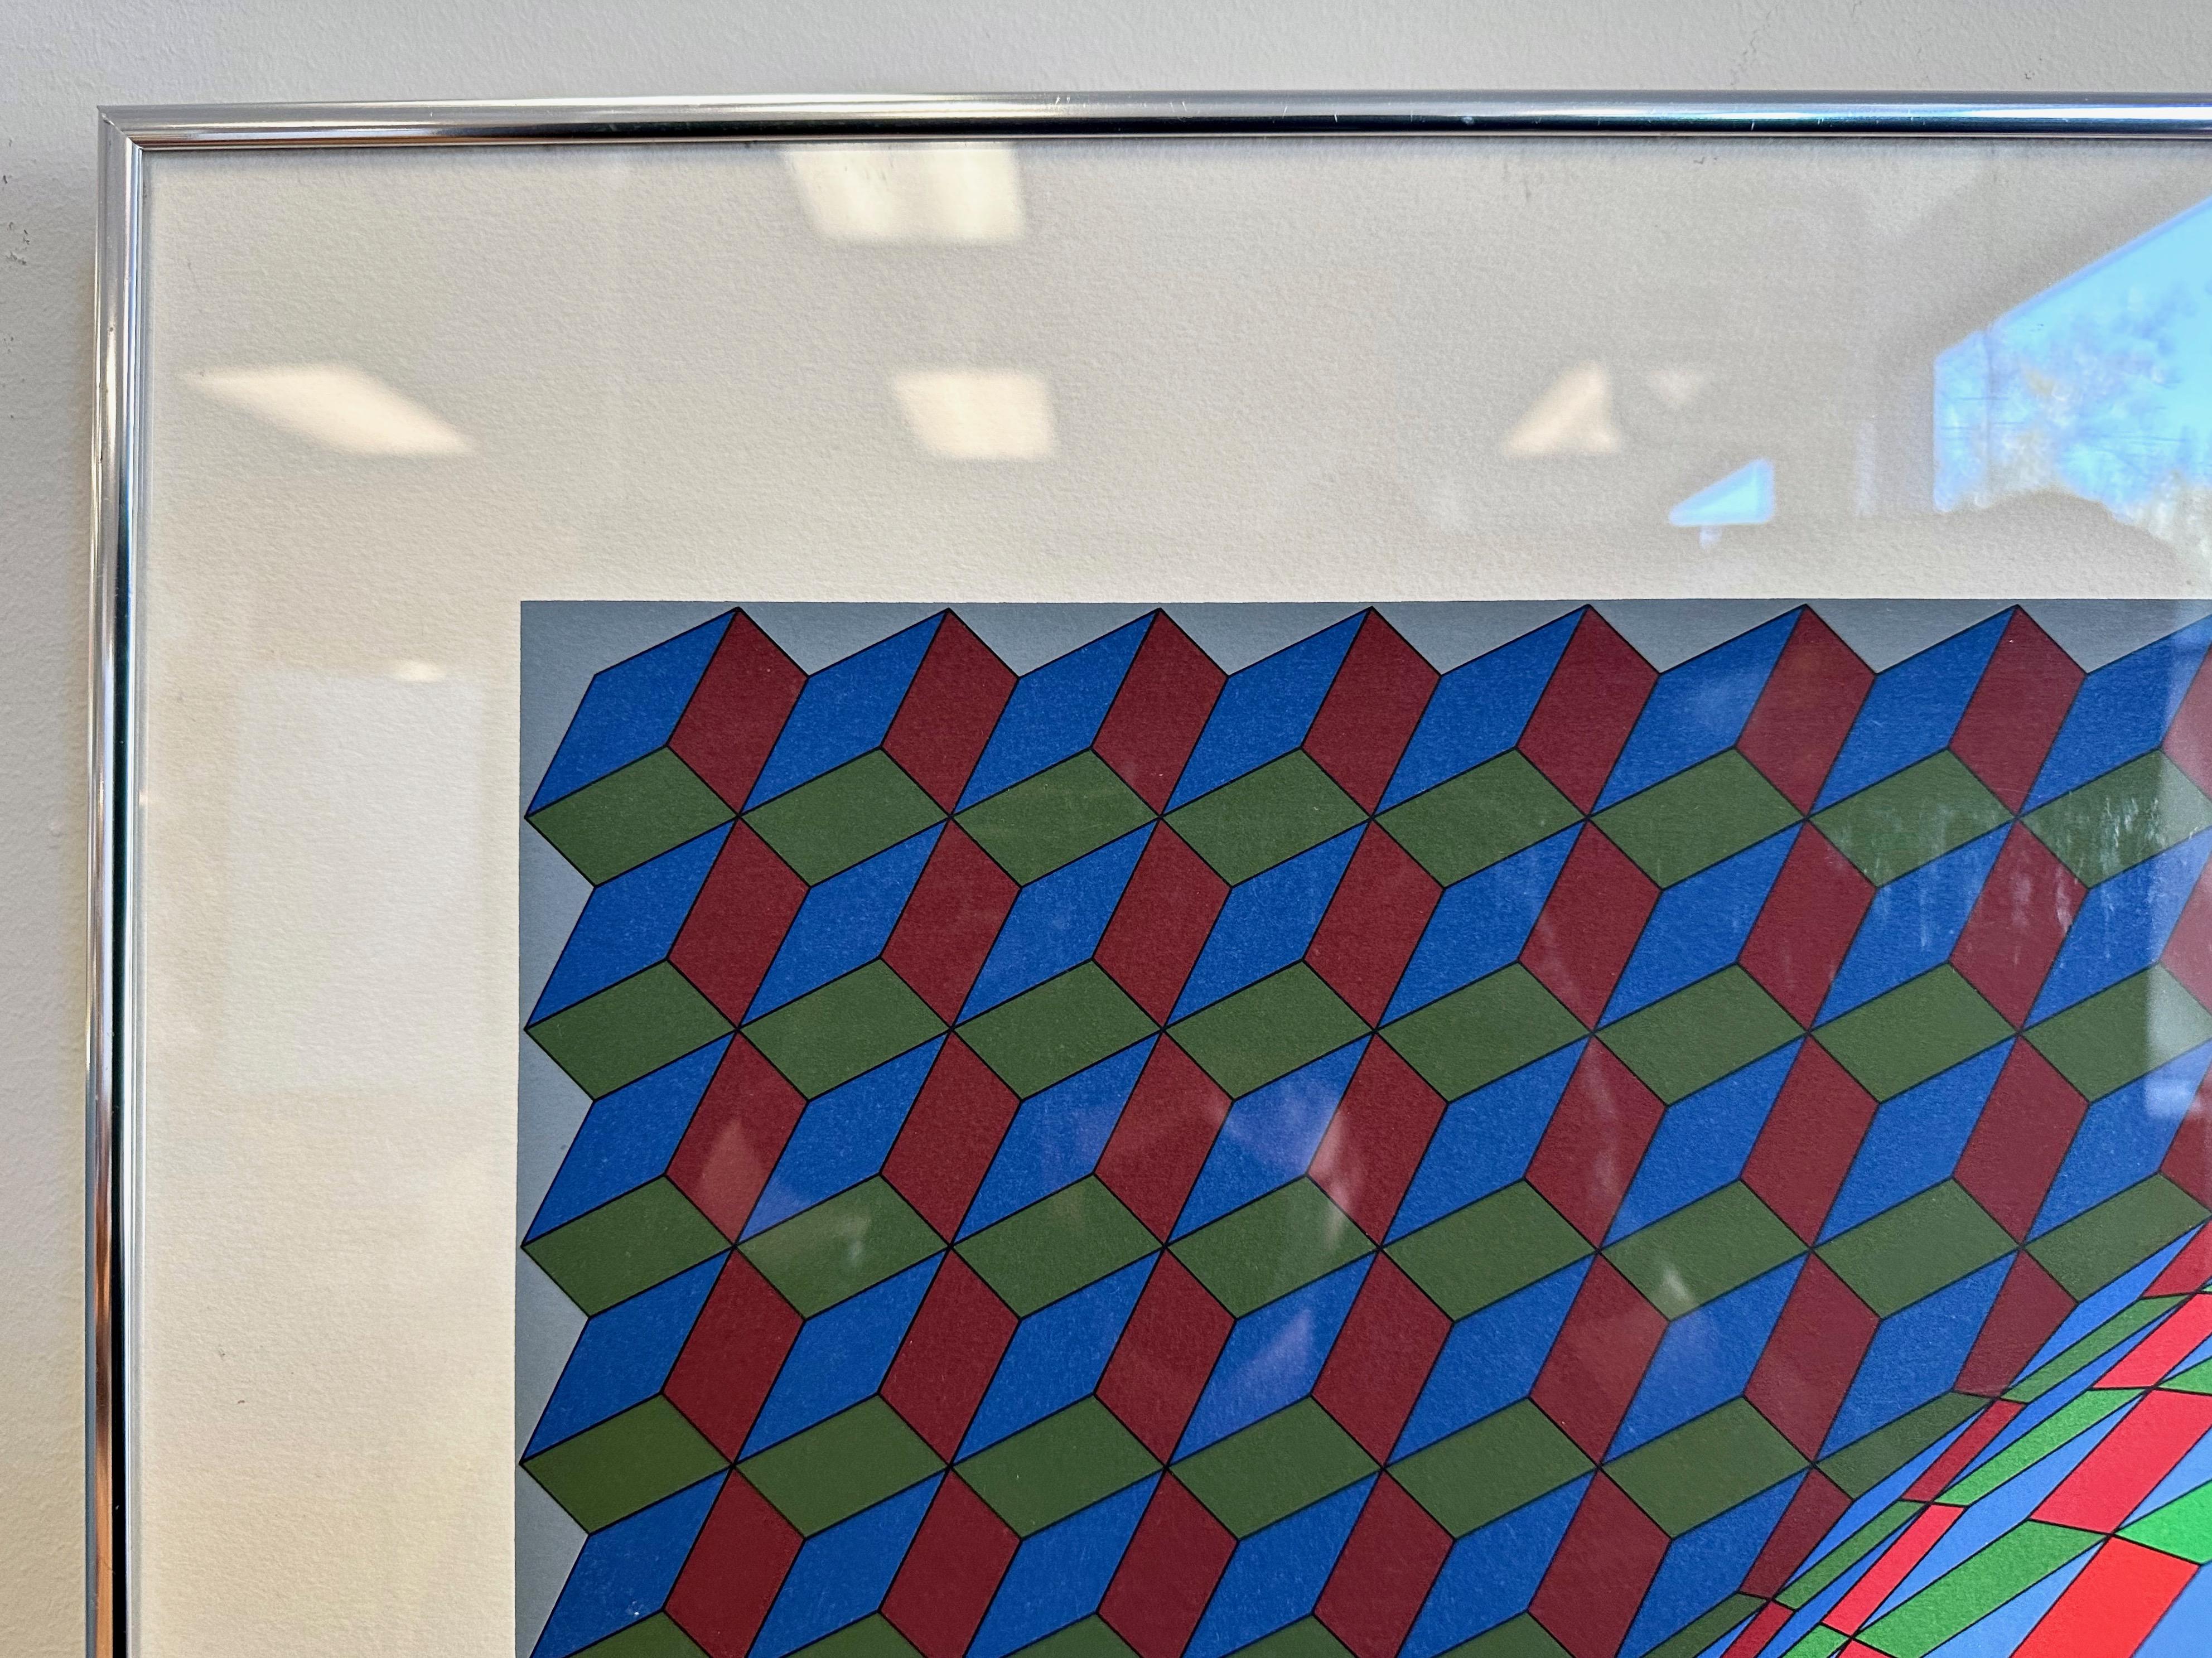 Mid-Century Modern Victor Vasarely, “Torony III”, Op Art Serigraph, Signed and Numbered, 1970s For Sale